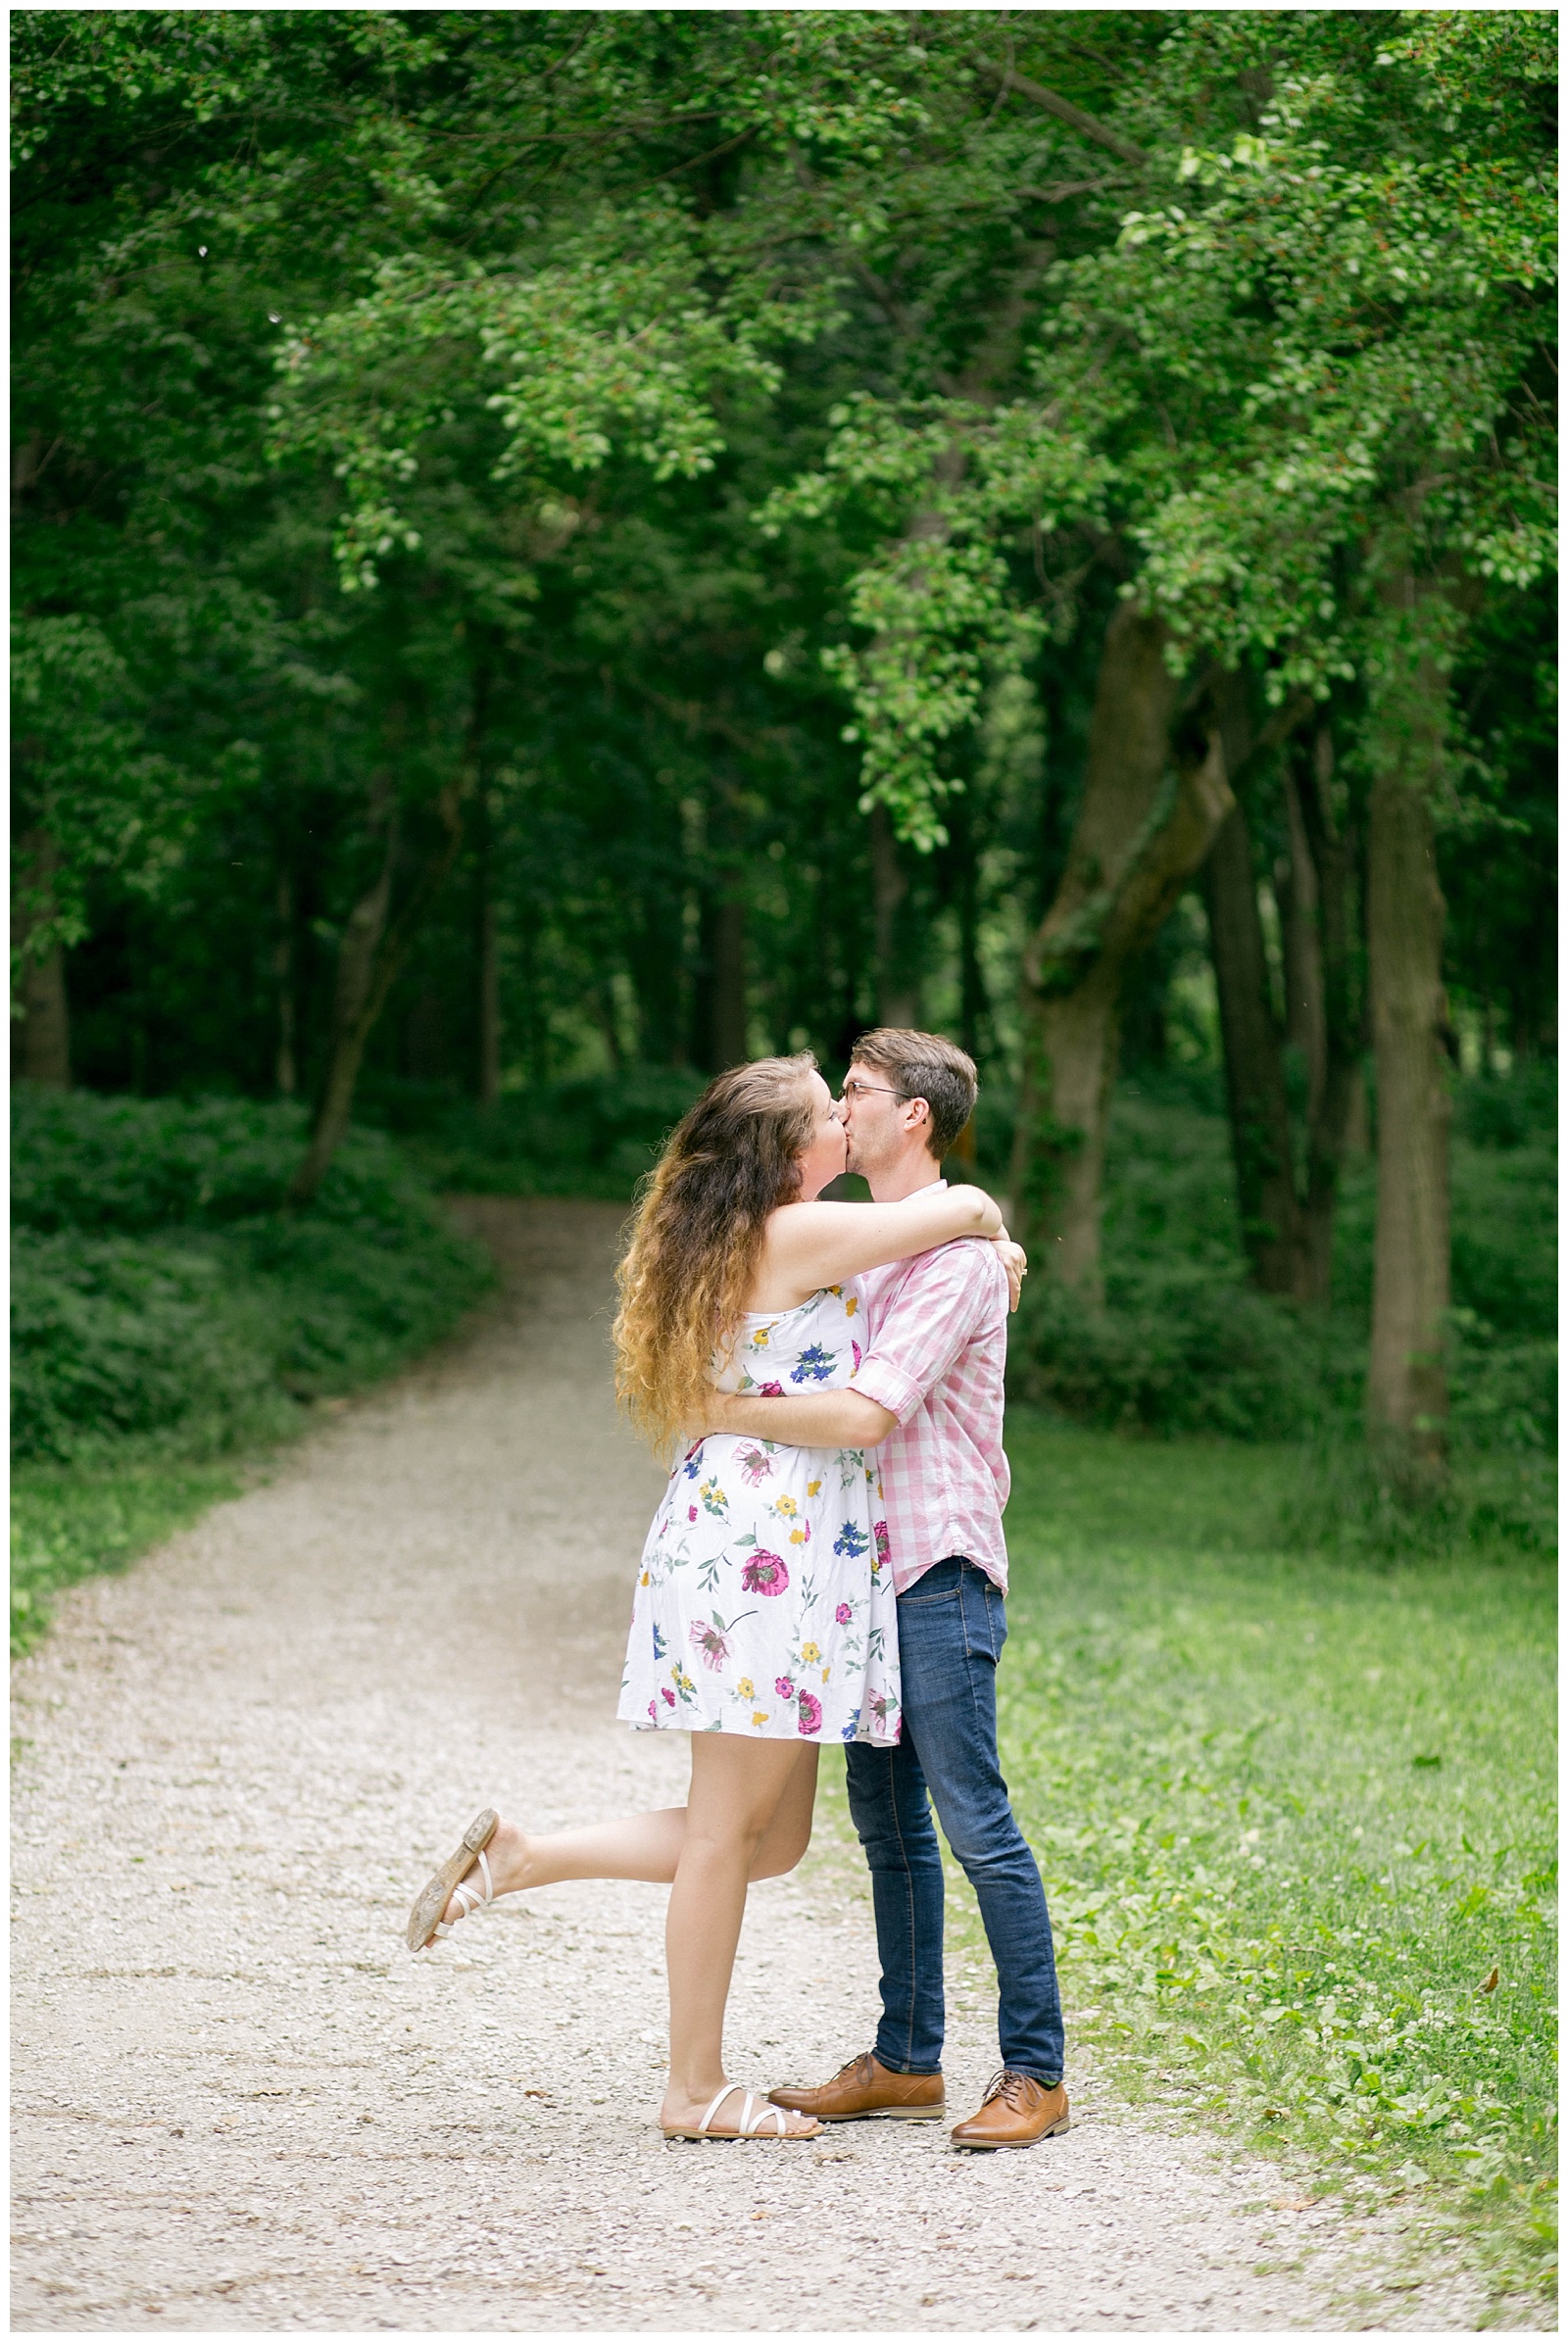 Indianapolis Engagement Session- Carrie and Andrew | Monica Brown Photography | monicabrownphoto.com